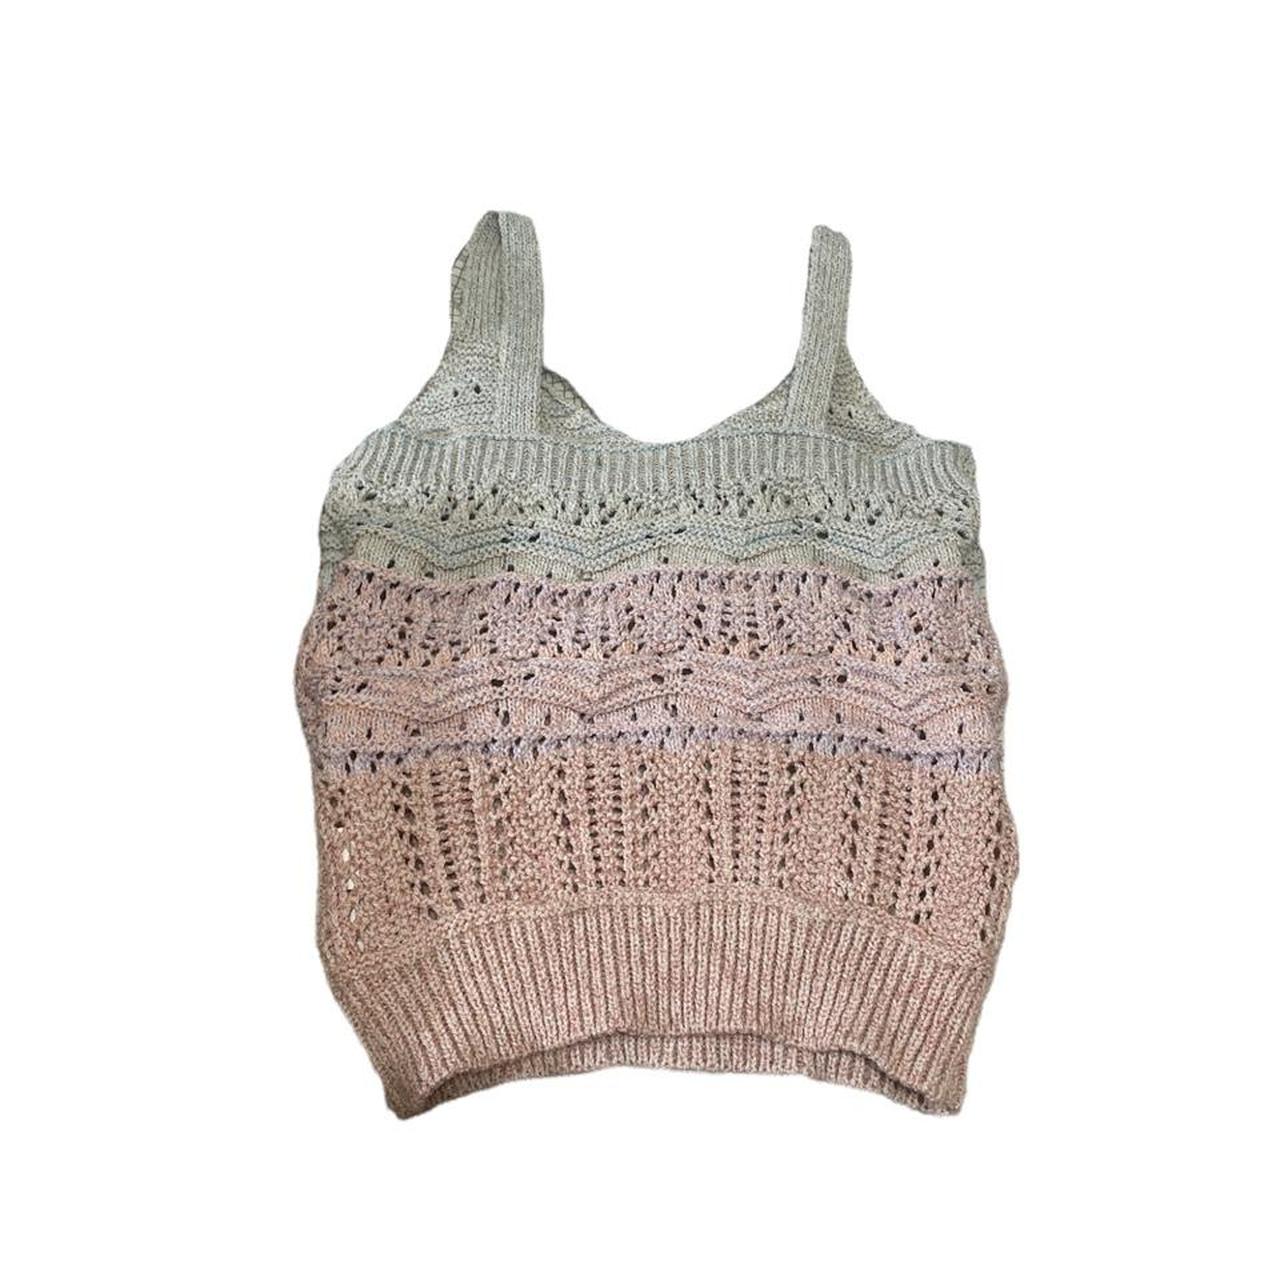 Product Image 2 - crochet tank top

size S, fits